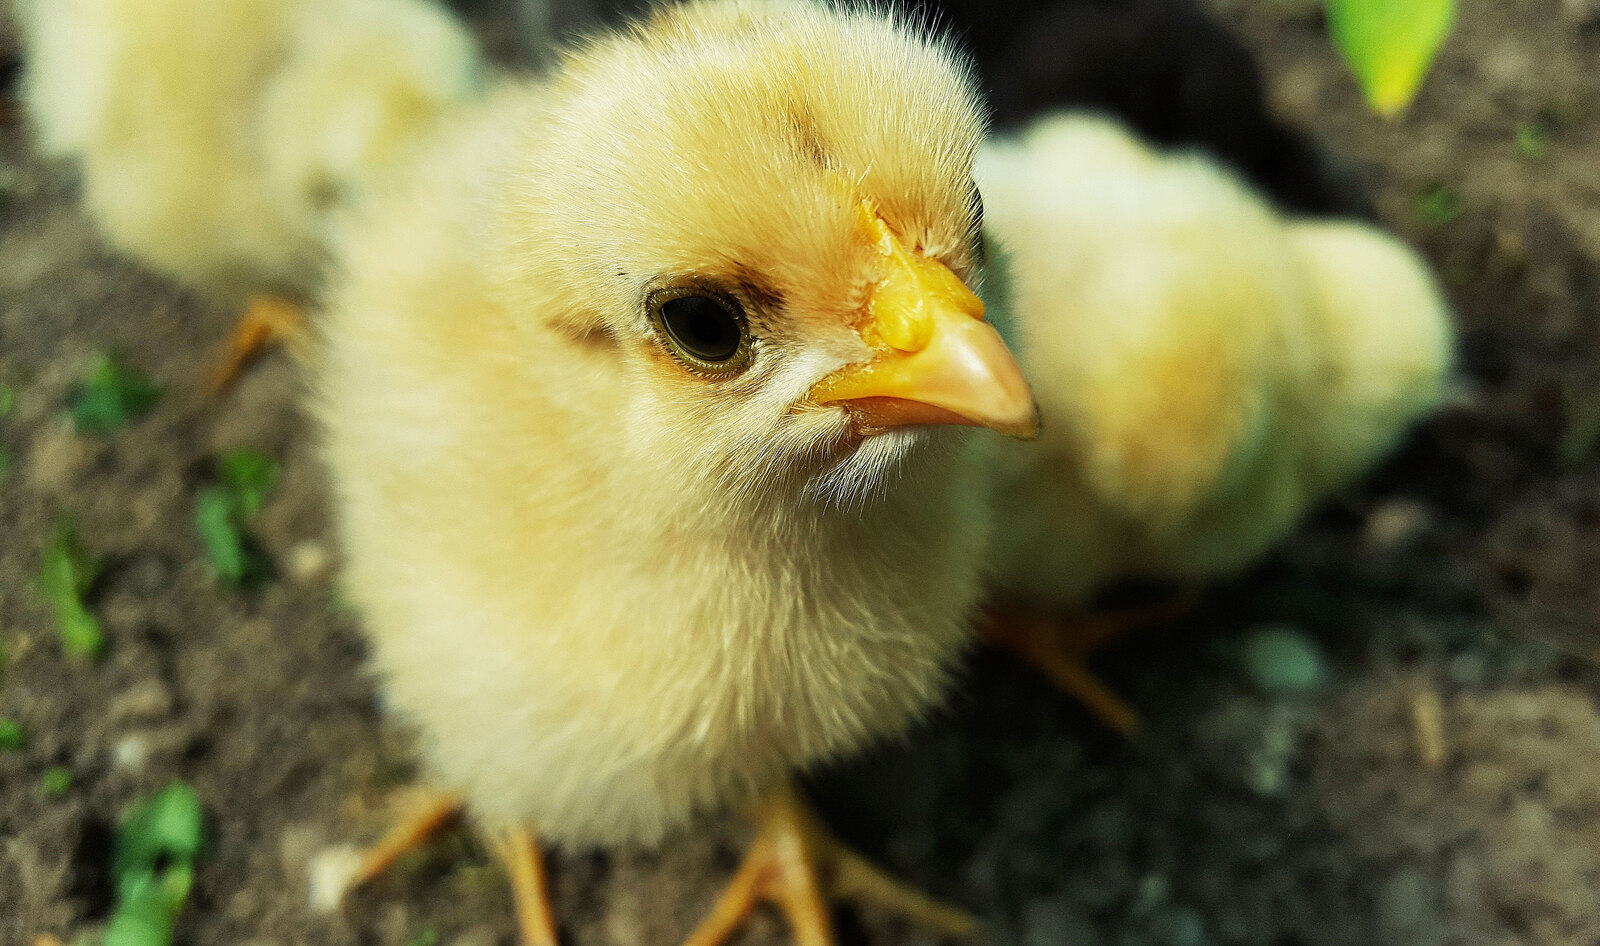 Two-Year Study Reveals How the Meat Industry Profits from Severely Deformed Chickens